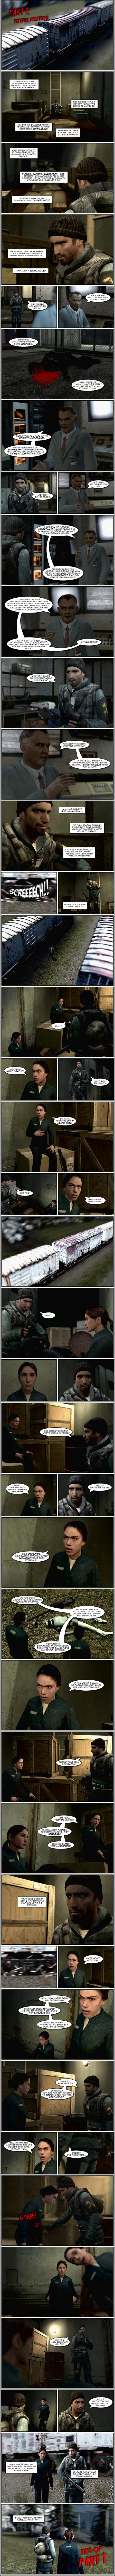 A train races past the forest outskirts of City Seventeen. A man in Resistance gear is sitting inside one of the carriages, surrounded by crates of ammo and resources. He thinks to himself how it makes him laugh sometimes, how much the world has changed since Black Mesa. He notes that against the Combine threat, people are prepared to trust each other completely, and that being human itself has become like a badge of honor. He considers that what people seem to be forgetting is that humanity is a flawed species, where deviants such as thieves, rapists and murderers have always existed in society, yet in this post-apocalyptic world, no one hears of them. The man wonders if people think all the murderers have disappeared. His name is Laslow Morgan and he is a Resistance fighter, a defender of human freedom, and also a serial killer. In a flashback, at the White Forest base, Laslow approaches Doctor Magnusson, saying he heard he wanted to see him. Magnusson asks him what took him so long and Laslow apologizes, explaining he was taking care of some business, as we see a dead woman bleeding from the neck somewhere in White Forest. Magnusson replies that whatever it was, it can't possibly be as important as what he has to say. Magnusson tells Laslow he needs him for a task of the utmost importance, noting that Laslow has demonstrated significant competence in the field so far, so Magnusson believes he is the right man for the job. Laslow tells him he's honored and Magnusson replies of course he is, then explains that a person of special importance is being brought in by train from City Seventeen, accompanied by a Resistance member, and the knowledge this person holds could give the Resistance a big advantage over the Combine, so it is imperative that they make it there unharmed. Magnusson tells Laslow to take the train and meet them half-way, explaining that the train drivers are sympathetic to the Resistance's cause, so the trains will come to a halt next to each other, on the outskirts of the Forest, after which Laslow will accompany the subject to White Point and then get off the train and return on foot. Magnusson asks Laslow if he has any questions and Laslow asks what is it that's so important about this person. Magnusson tells him he need not concern himself with that and that there is a car waiting to take him to the station. Back in the present, Laslow thinks to himself with a smile what a pompous ass Magnusson is and that the only reason he hasn't killed him is that humanity needs his expertise if they are going to survive. Laslow notes that he may be a sociopath, but he has no more desire to see humanity destroyed than any other man. The train grinds to a halt and Laslow gets up to meet his VIP. He exits his train and heads towards the other train. He meets two women inside, one sitting on a box who acknowledges him, and another sitting on the floor that doesn't react to his presence. Laslow greets them and the one sitting in a box asks if he's from White Forest. Laslow tells her that's right and introduces himself. The woman tells him she's Katy from the City Seventeen Resistance. Laslow turns to the other woman and asks for her name, to which Katy replies with disgust that she doesn't have a name. Their train gets moving. Laslow bends down and says hello to the other woman. The woman, who Laslow notes has a scar on her face, is unresponsive. Laslow stares at her in confusion, then asks Katy what's wrong with her. Katy asks if they didn't tell him and says that she is a Combine assassin. Laslow is shocked, so Katy continues by explaining that the assassin is defective and follows any given order, including those given by humans. She explains that they found the assassin about a year ago, on the outskirts of City Seventeen, on the ground with a sniper rifle next to her. Katy says they thought she was dead at first, but it turned out she was just waiting for instructions, and that they want to examine her at White Forest and this is the first chance they've had to get her there. Katy notes that if he asks her, they should have just killed the assassin when they found her. Laslow asks if that isn't a bit harsh and Katy says not for a traitor like her, telling Laslow that people aren't forced to become Combine, they volunteer, so she's no better than a murderer. Laslow gets angry for being compared to the Combine. The train stops and Katy notes they are at White Point. She then tells Laslow there is one thing he should know, that under no circumstances he is to give the assassin a gun, as doing so triggers her. Katy tells him she doesn't know what would happen, but it definitely wouldn't be pretty. Laslow thanks her for the information and asks Katy how she is getting back to City Seventeen and whether the train loops around. Katy tells him she's catching another train as that one doesn't stop again until City Twenty. Laslow says that's great and one more thing, then stabs the woman with his knife. She falls down to the ground in front of the assassin, who doesn't react. Laslow turns to the assassin and orders her to come with him. She gets up and Laslow notes she takes orders just like Katy said. Both leave the train before it departs and Laslow notes that this is an odd feeling, as the woman is the first person to know what he is without having to die, and at least he doesn't have to worry about her telling anyone. Laslow notes there is something familiar about her. End of part 1.